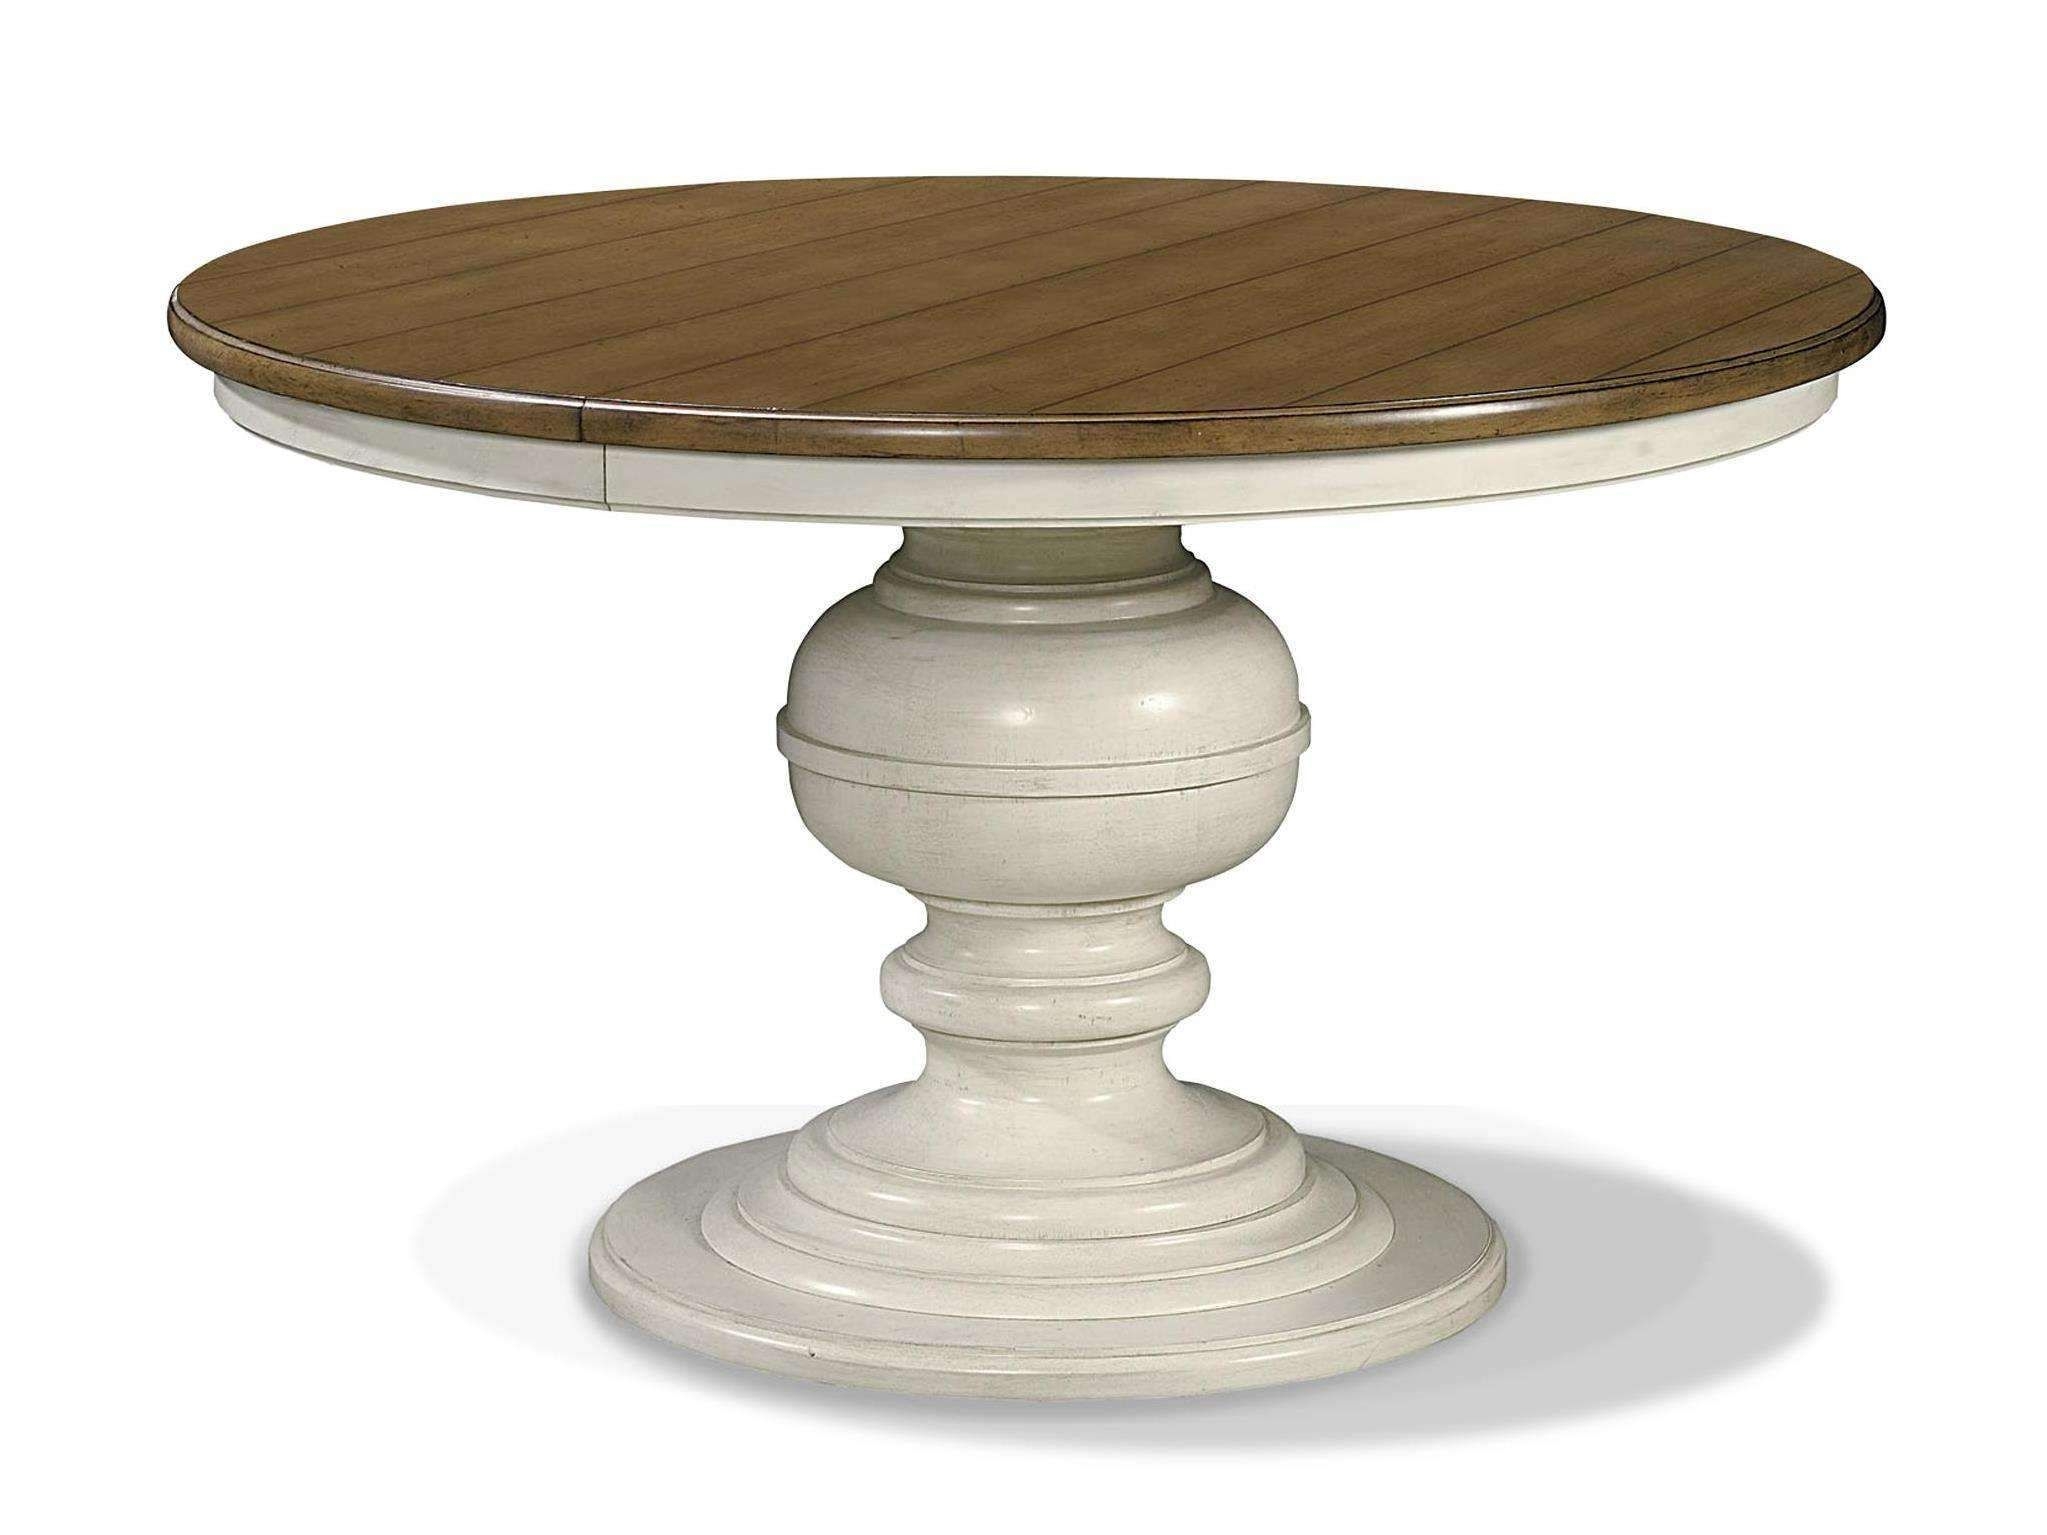 The beach house radley round dining table